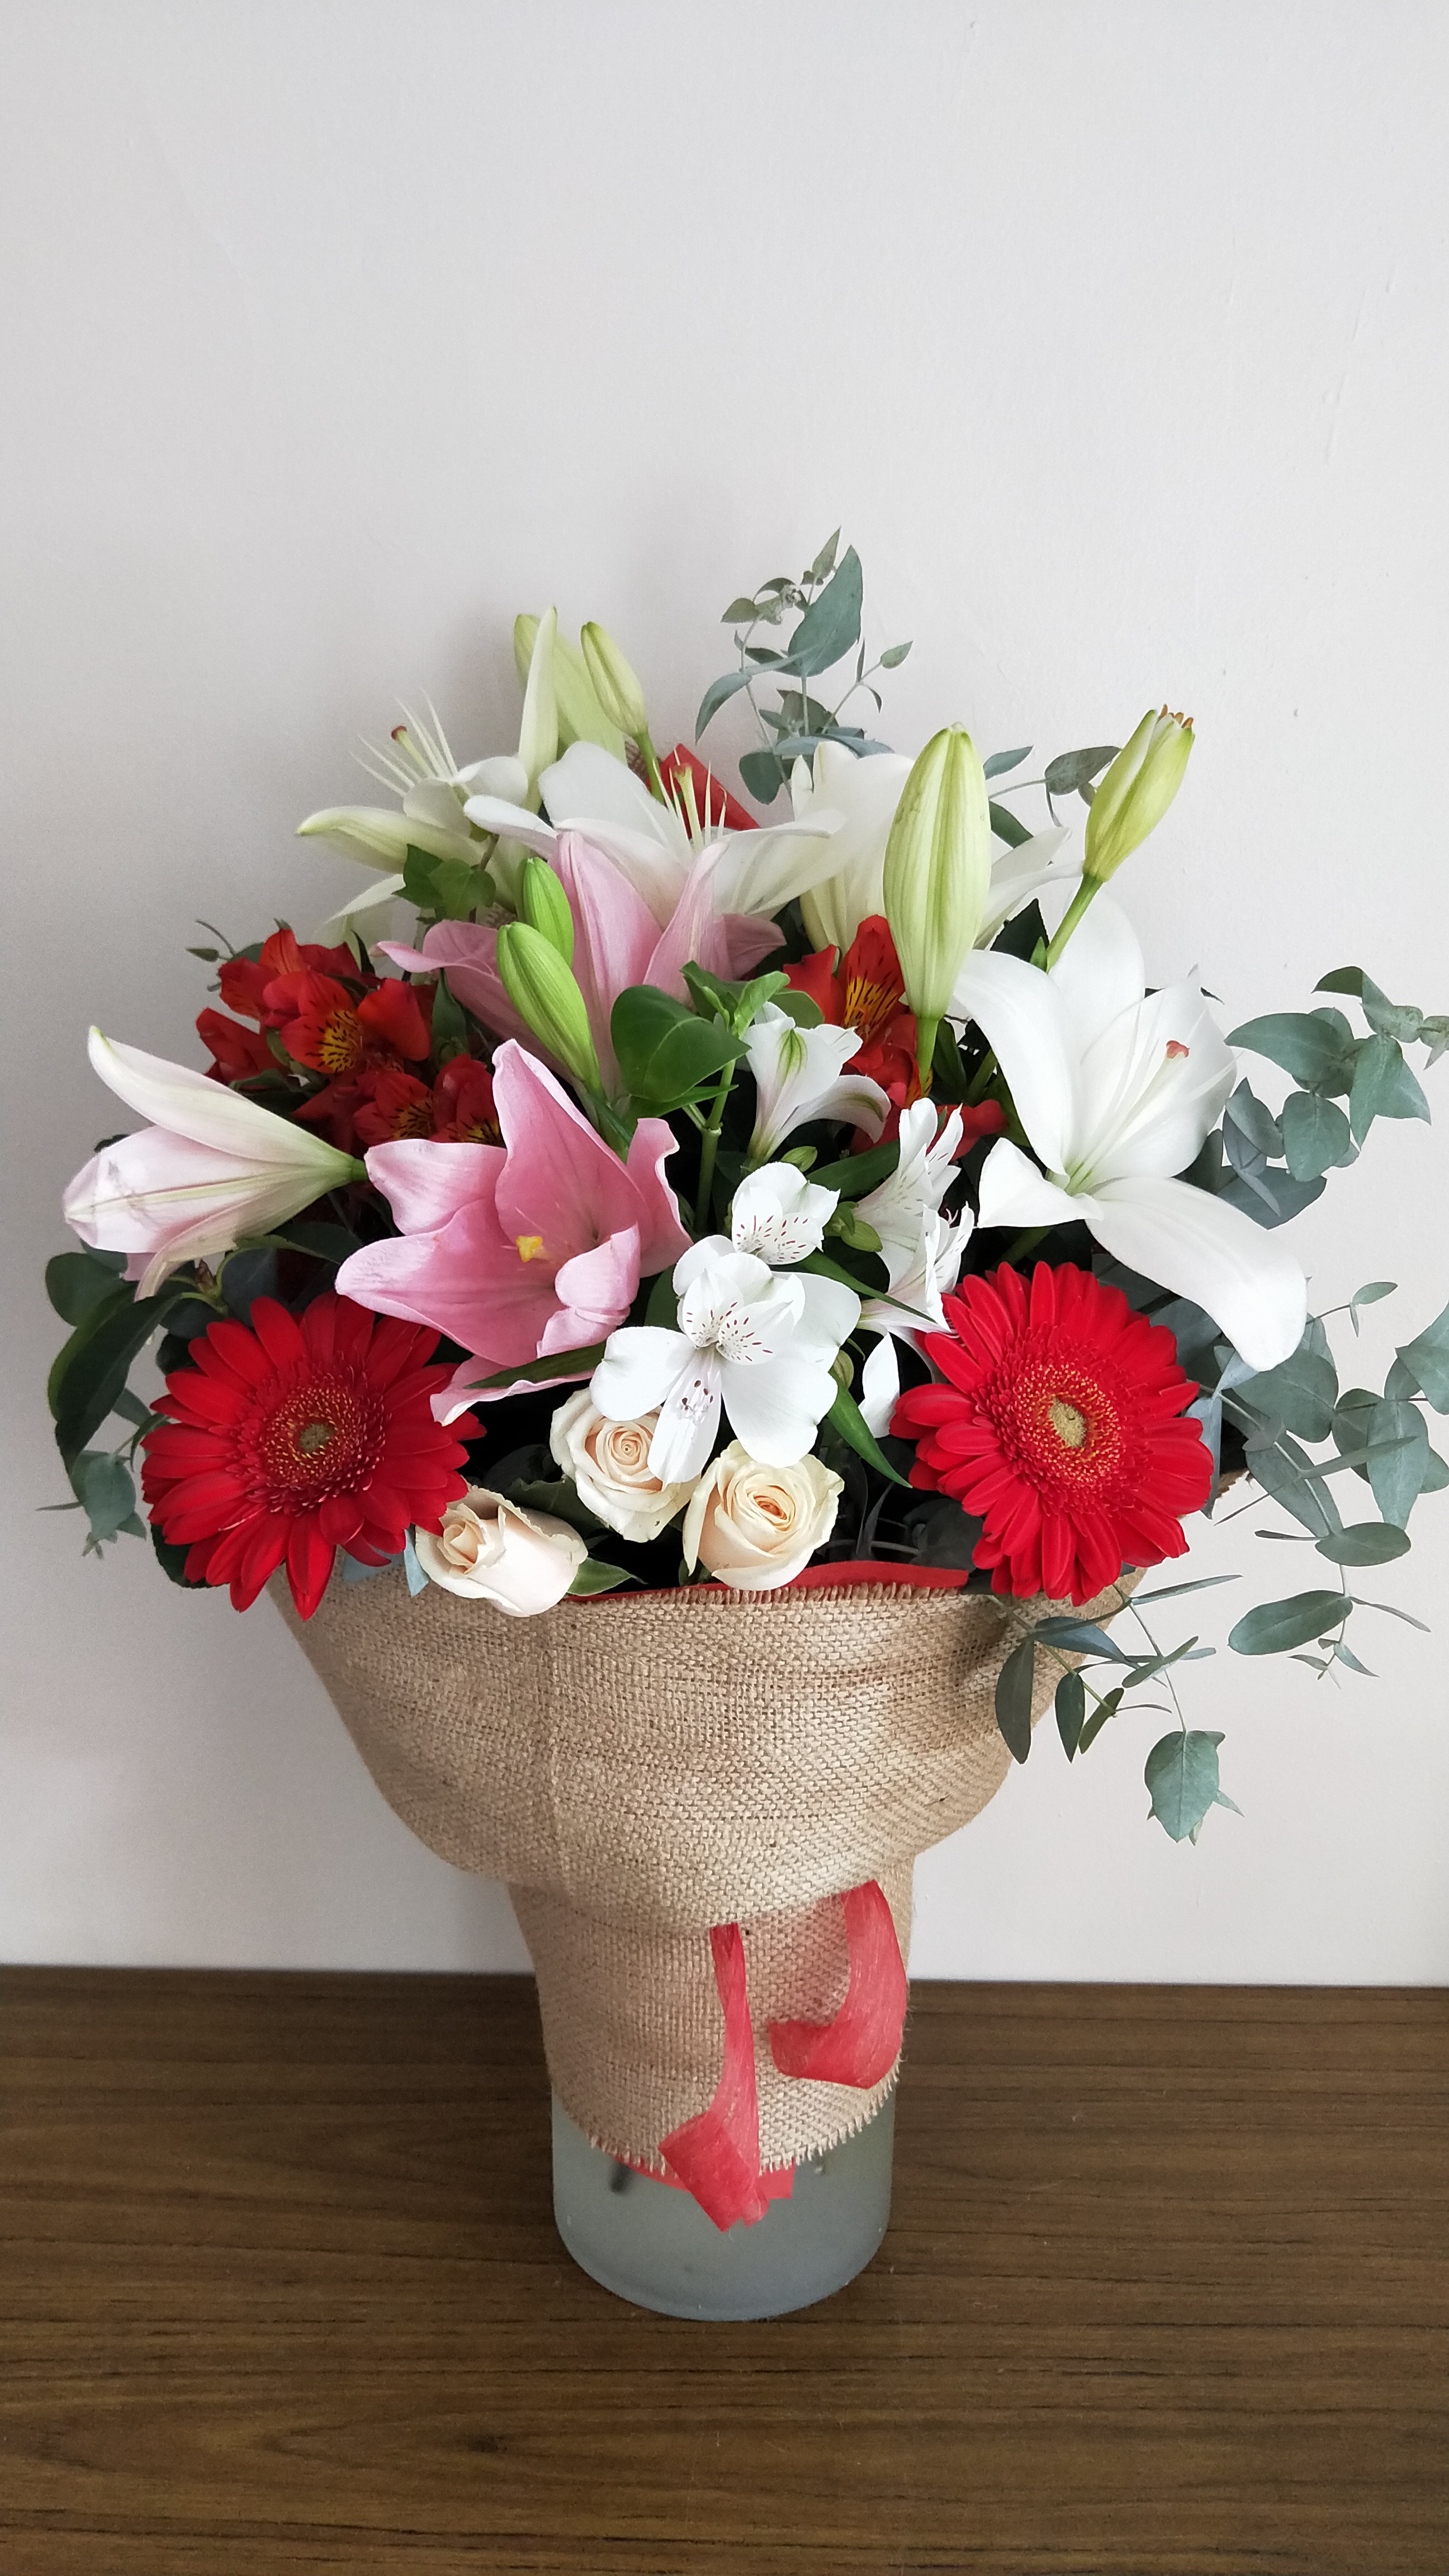 Lavish bouquet makes an impression which last forever.